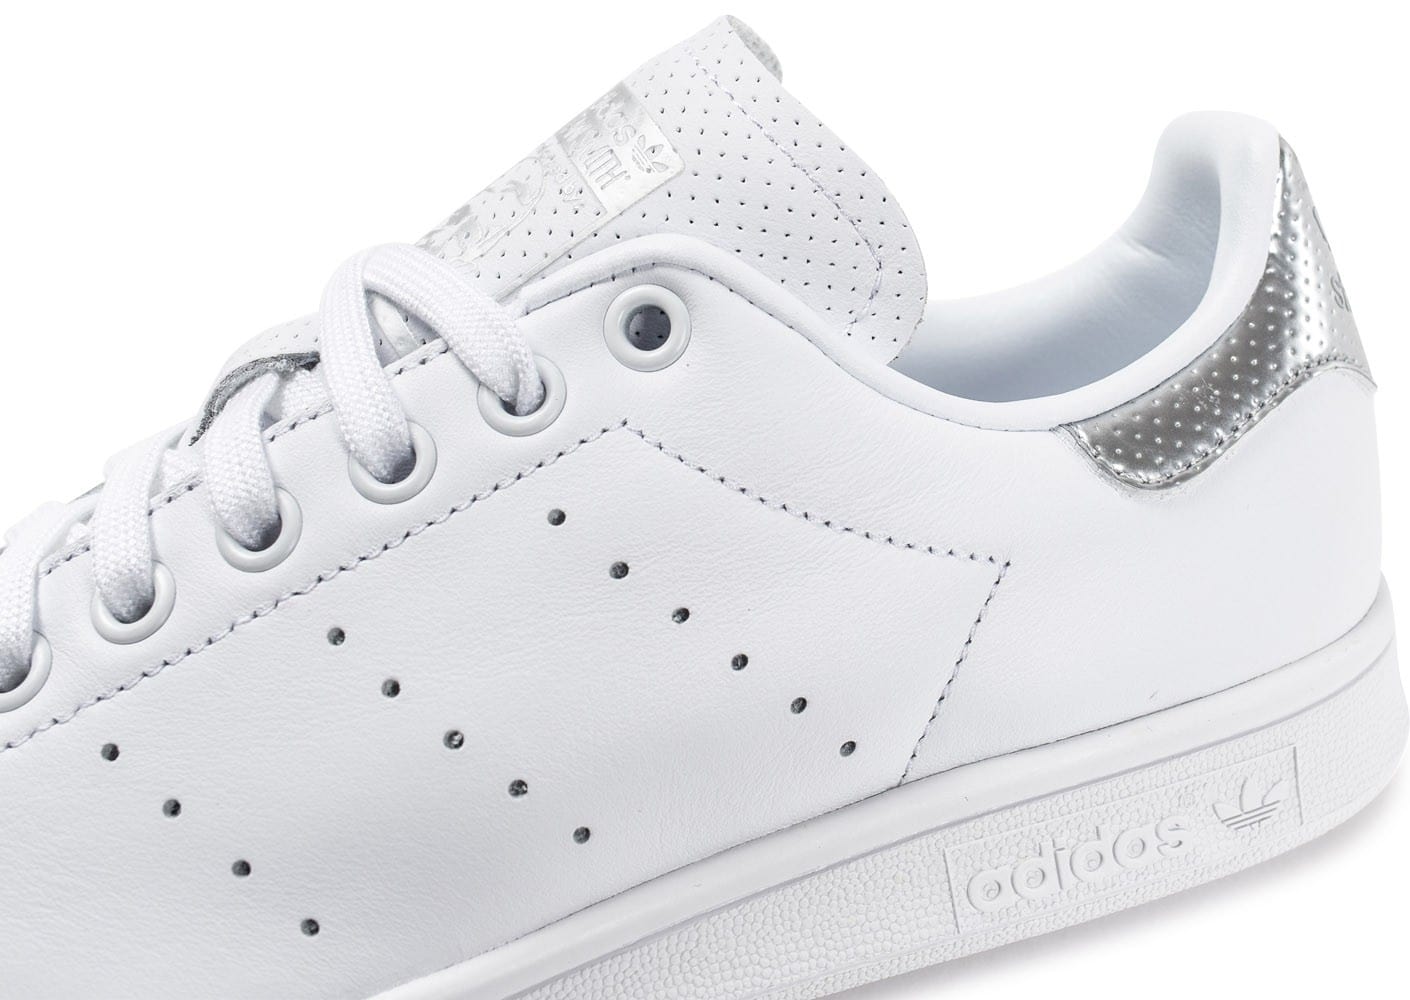 adidas stan smith blanche argent